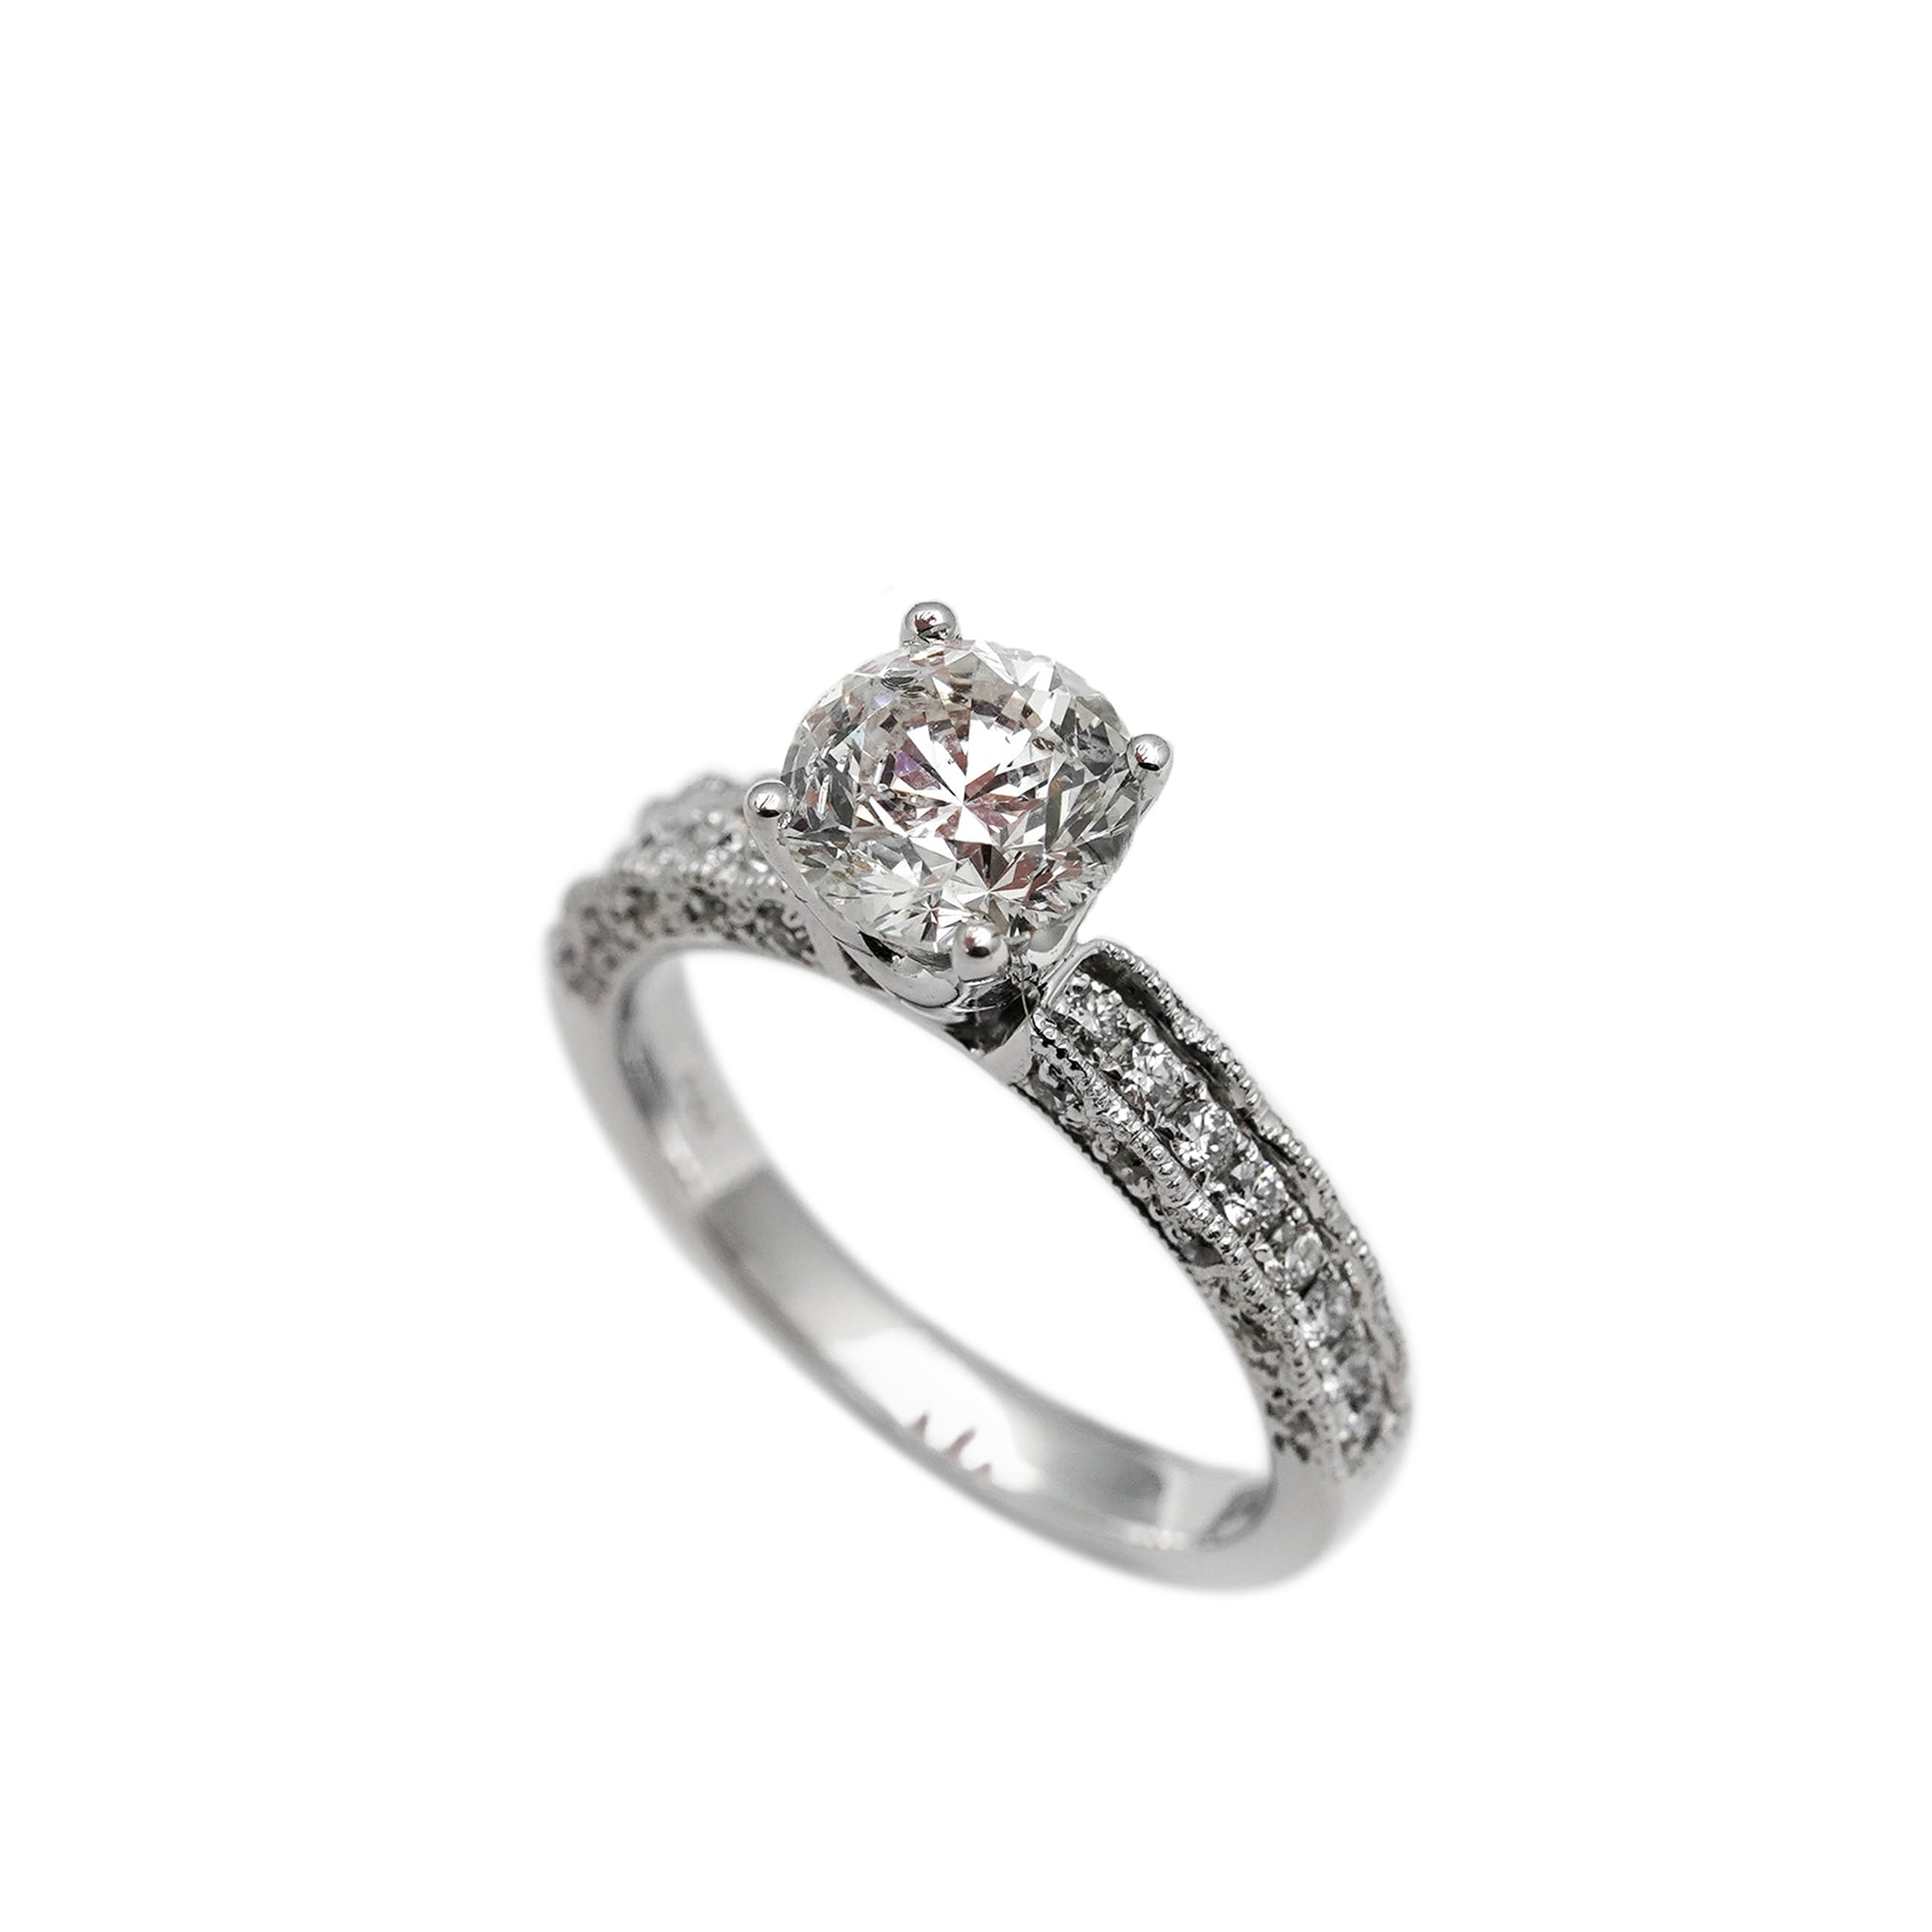 18K White Gold 1.70CT Round Brilliant Diamond Ring with Pavé Side Stones